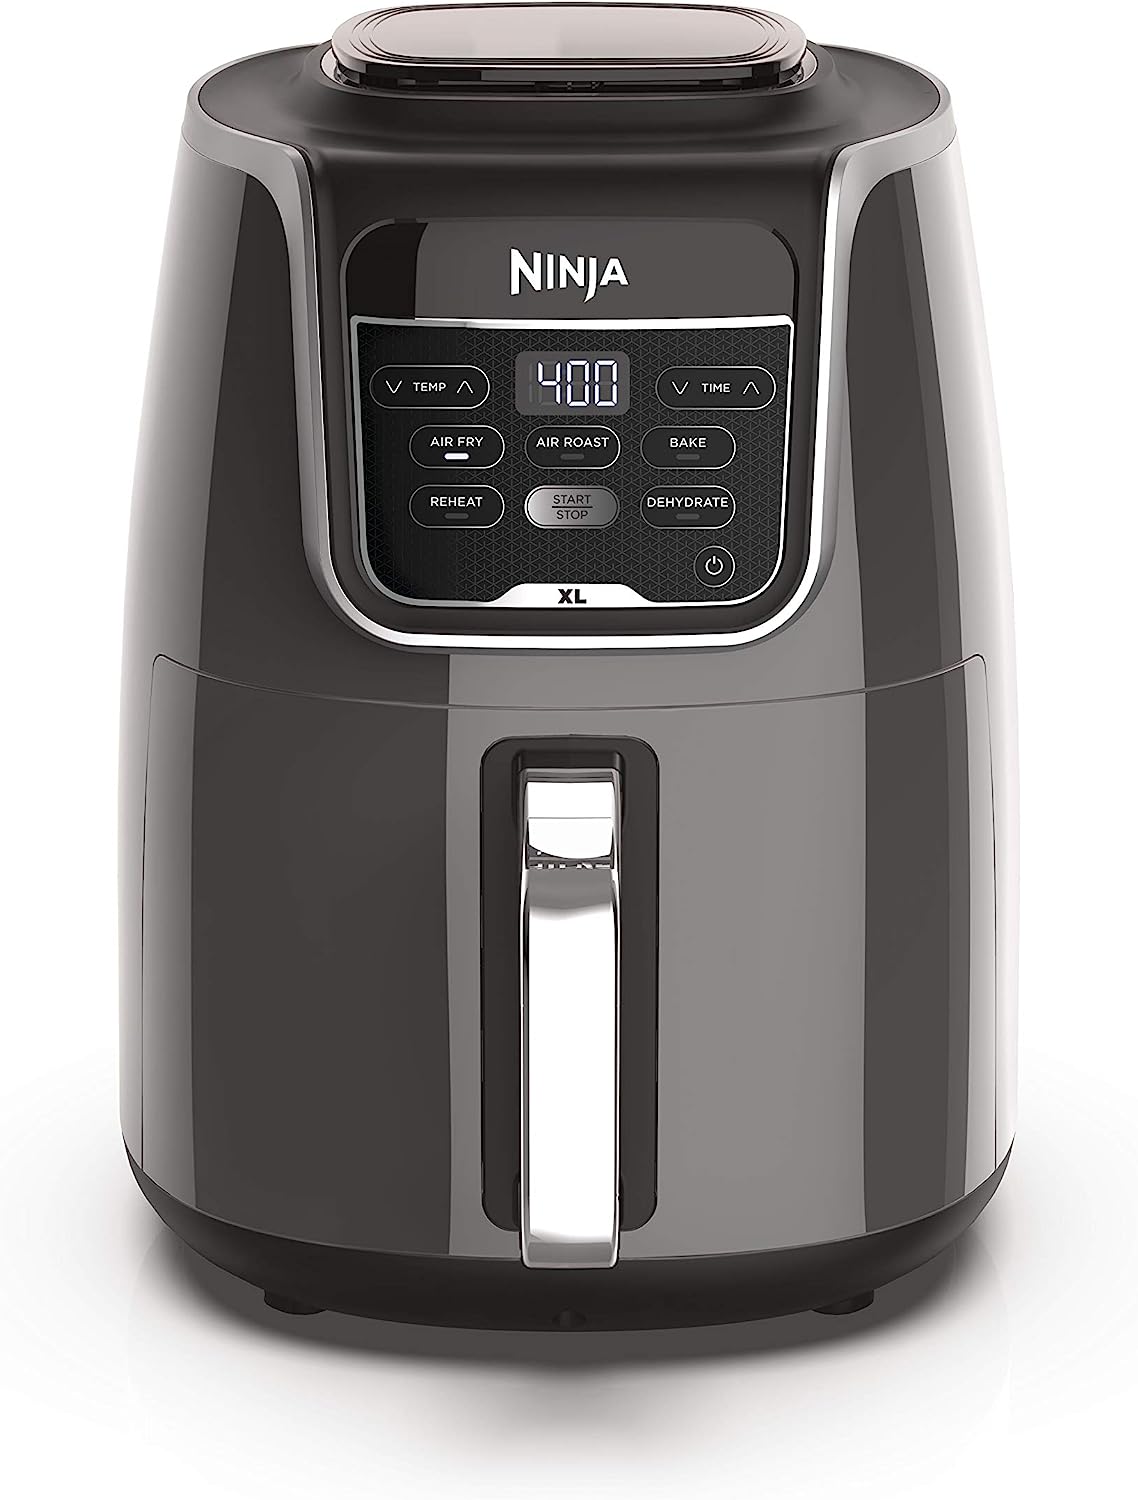 NINJA AF101C, Air Fryer, 3.8L Less Oil Electric Air Frying, Equipped with Crisper Plate + Multi-Layer Rack + Non Stick Basket, Programmable Control Panel, Black, 1550W, (Canadian Version) 